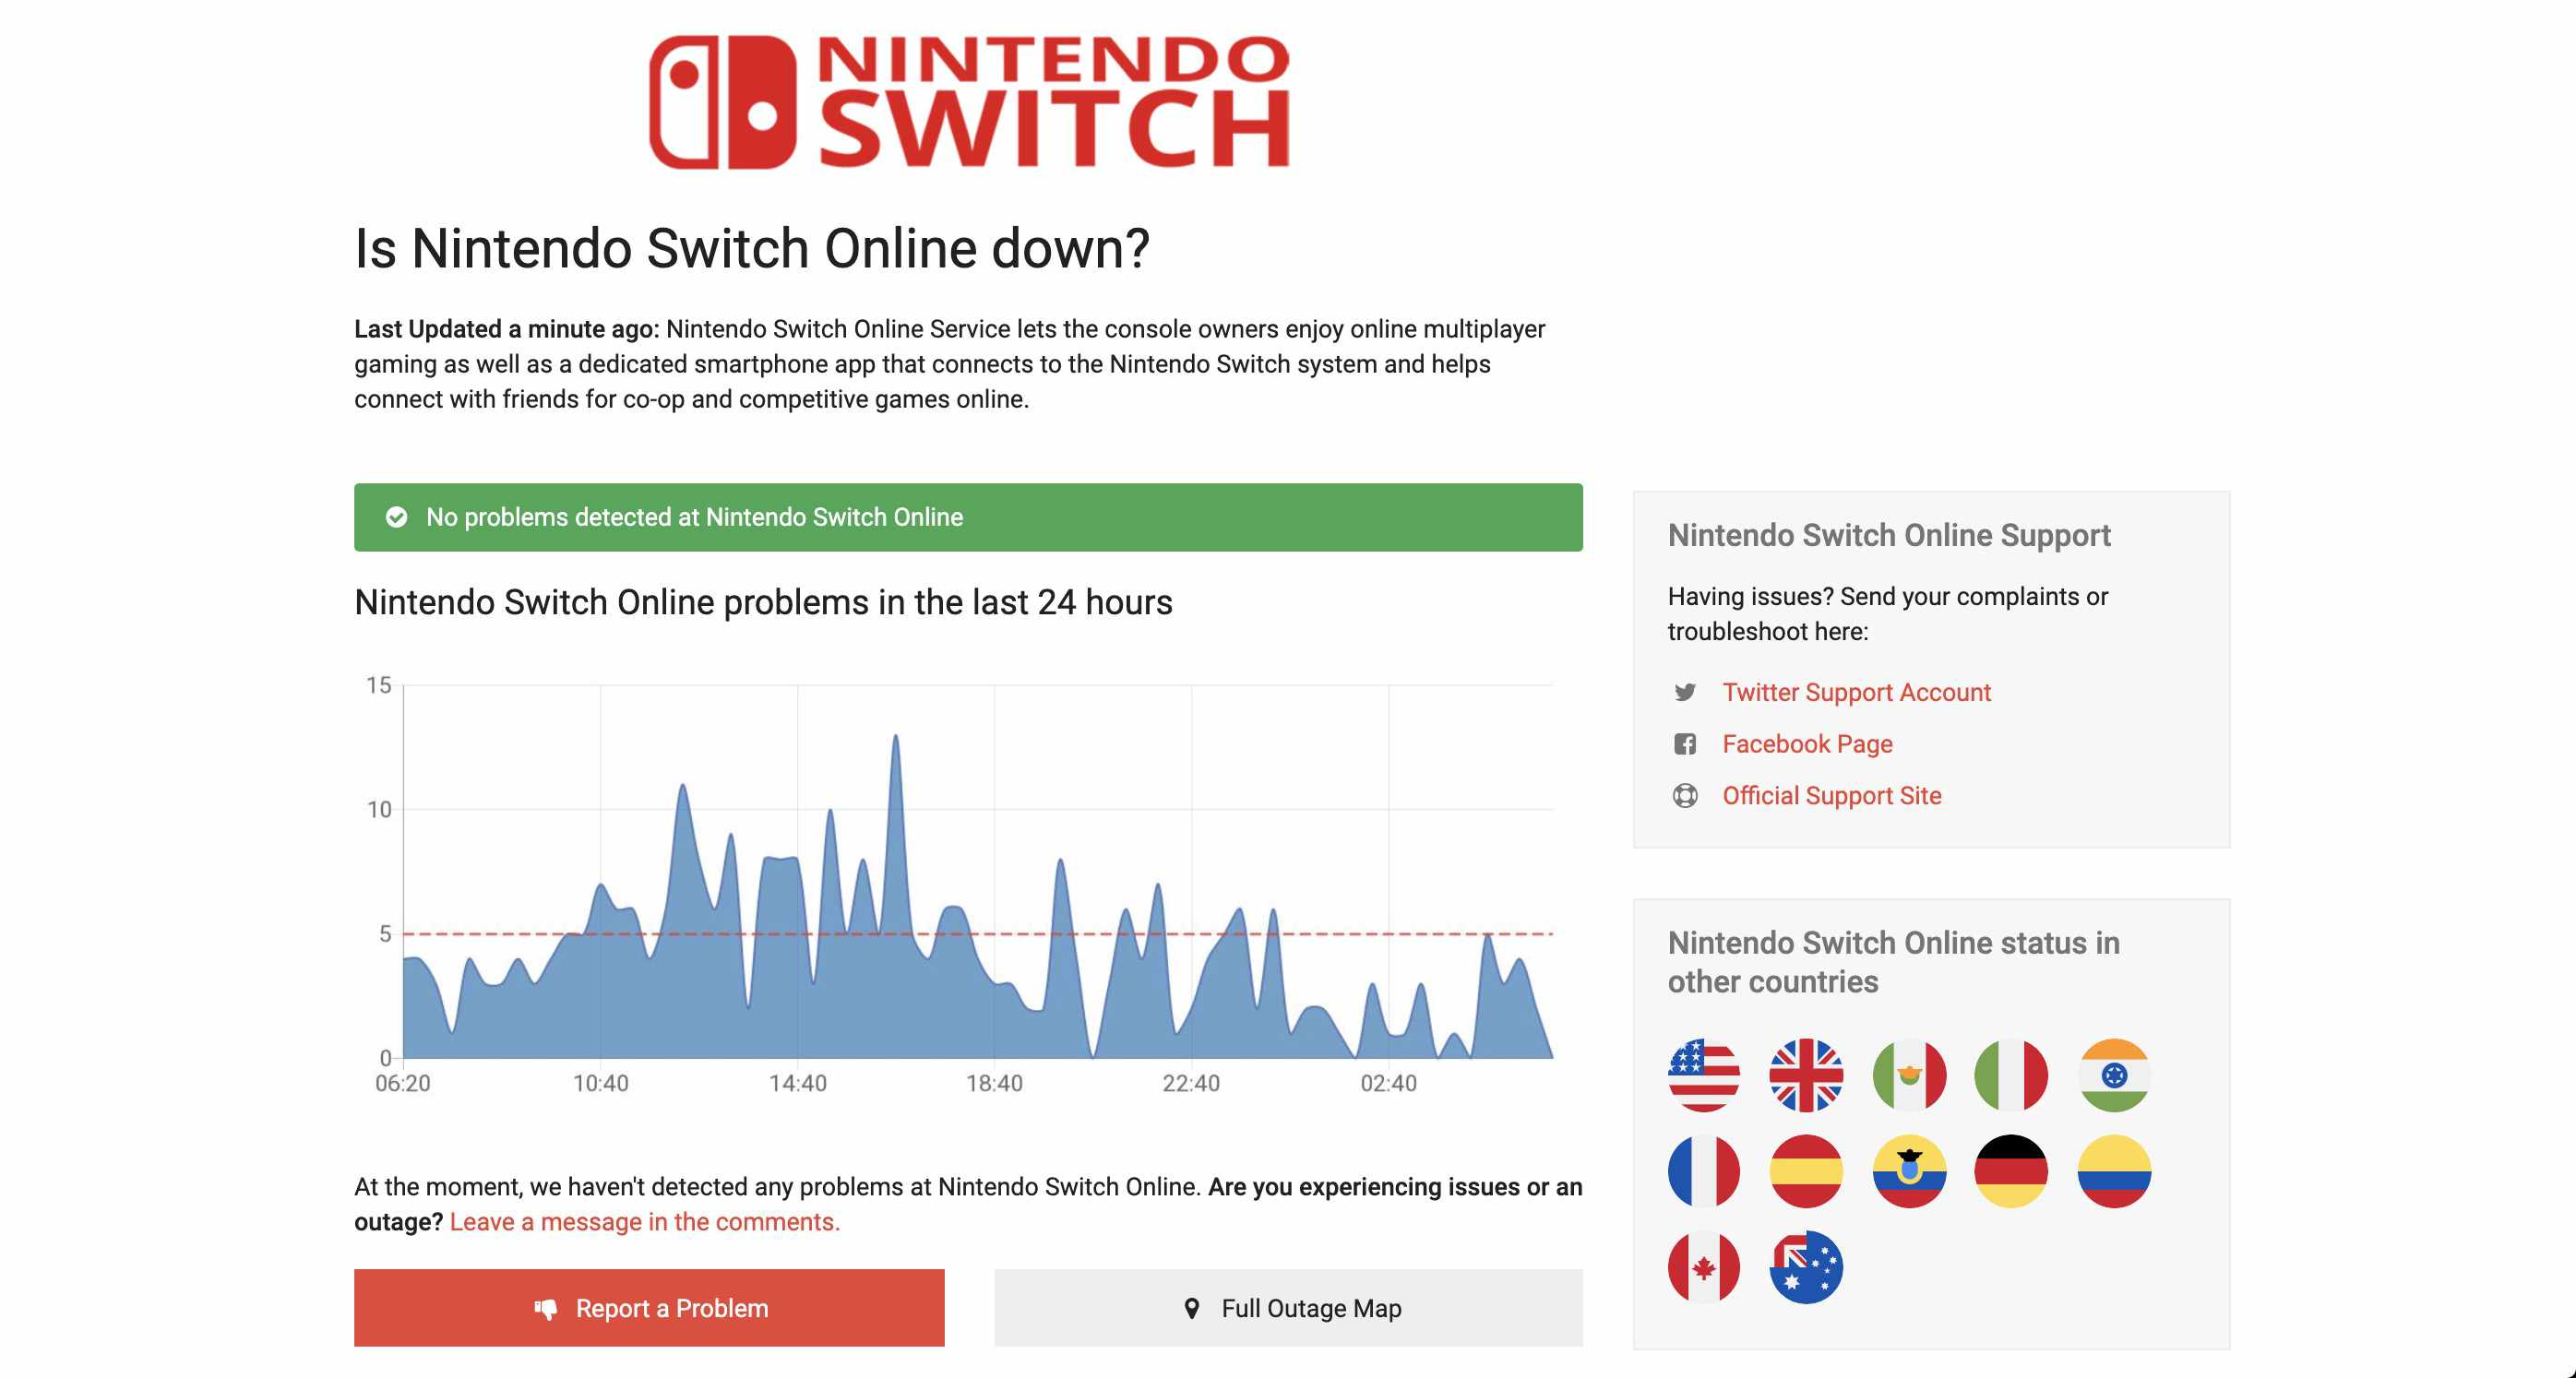 O site "Is Nintendo Switch Online Down"